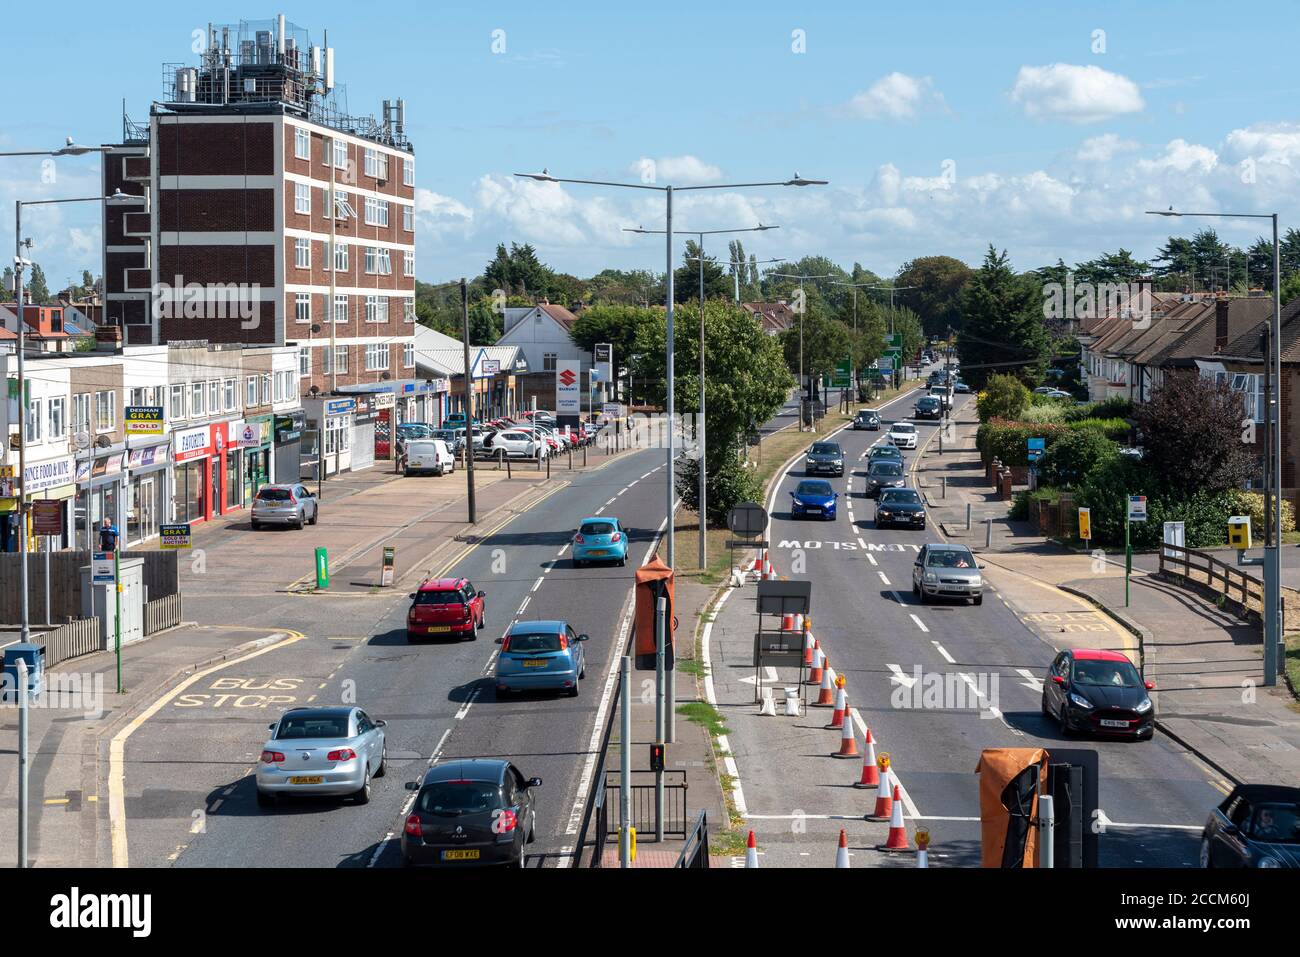 The Bell road junction of the A127 Prince Avenue with Hobleythick Lane, soon to be the site of a lengthy redesign and roadworks. Lane closure. Shops Stock Photo